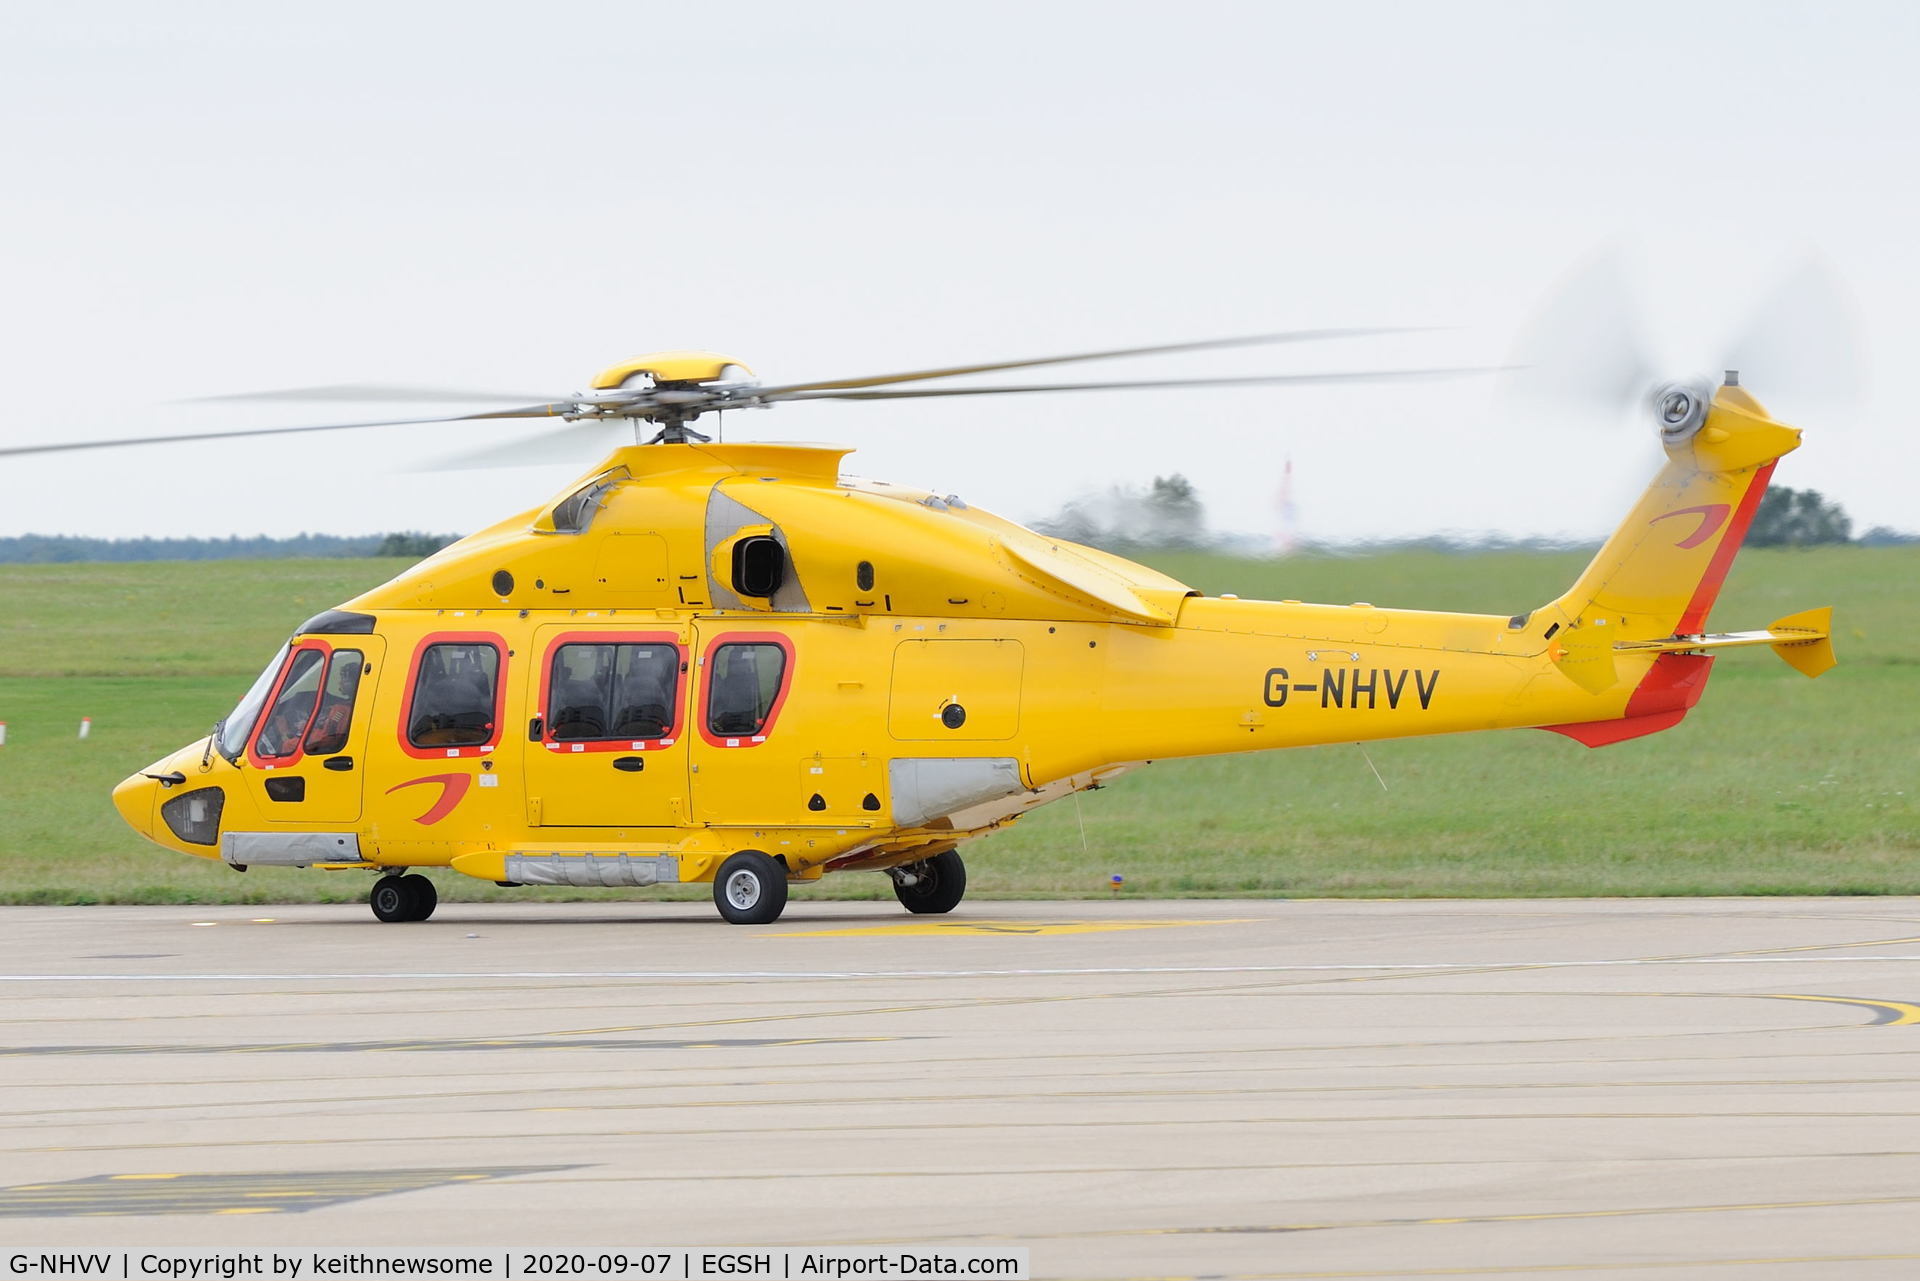 G-NHVV, 2014 Airbus Helicopters EC-175B C/N 5002, Arriving at Norwich from Aberdeen.